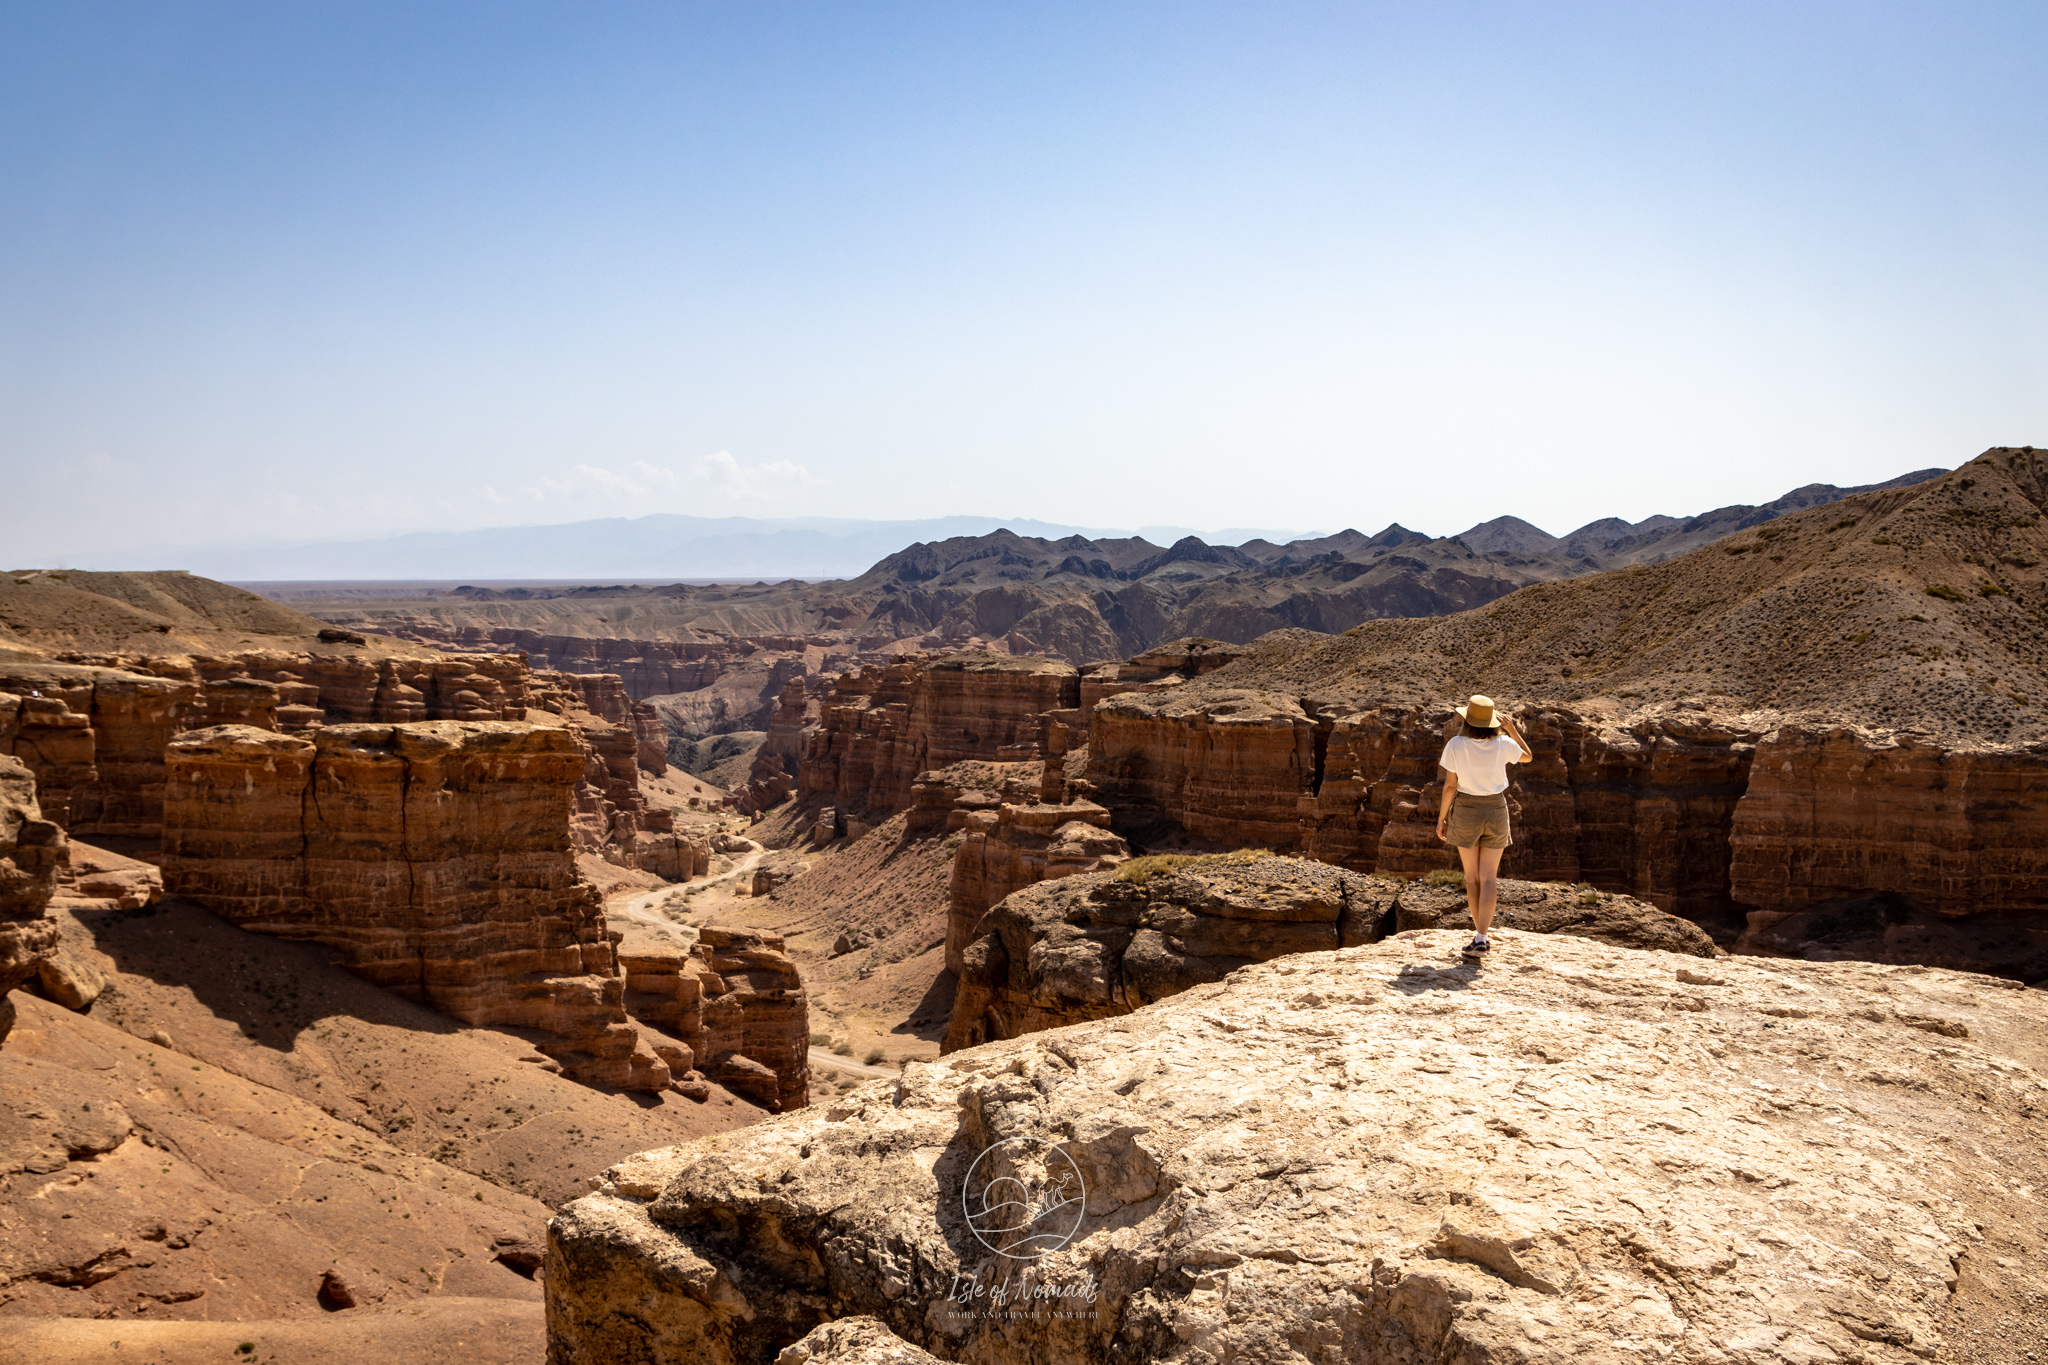 Even though Charyn Canyon is not very large nor deep, it is very impressive and a must-see when in South-East Kazakhstan